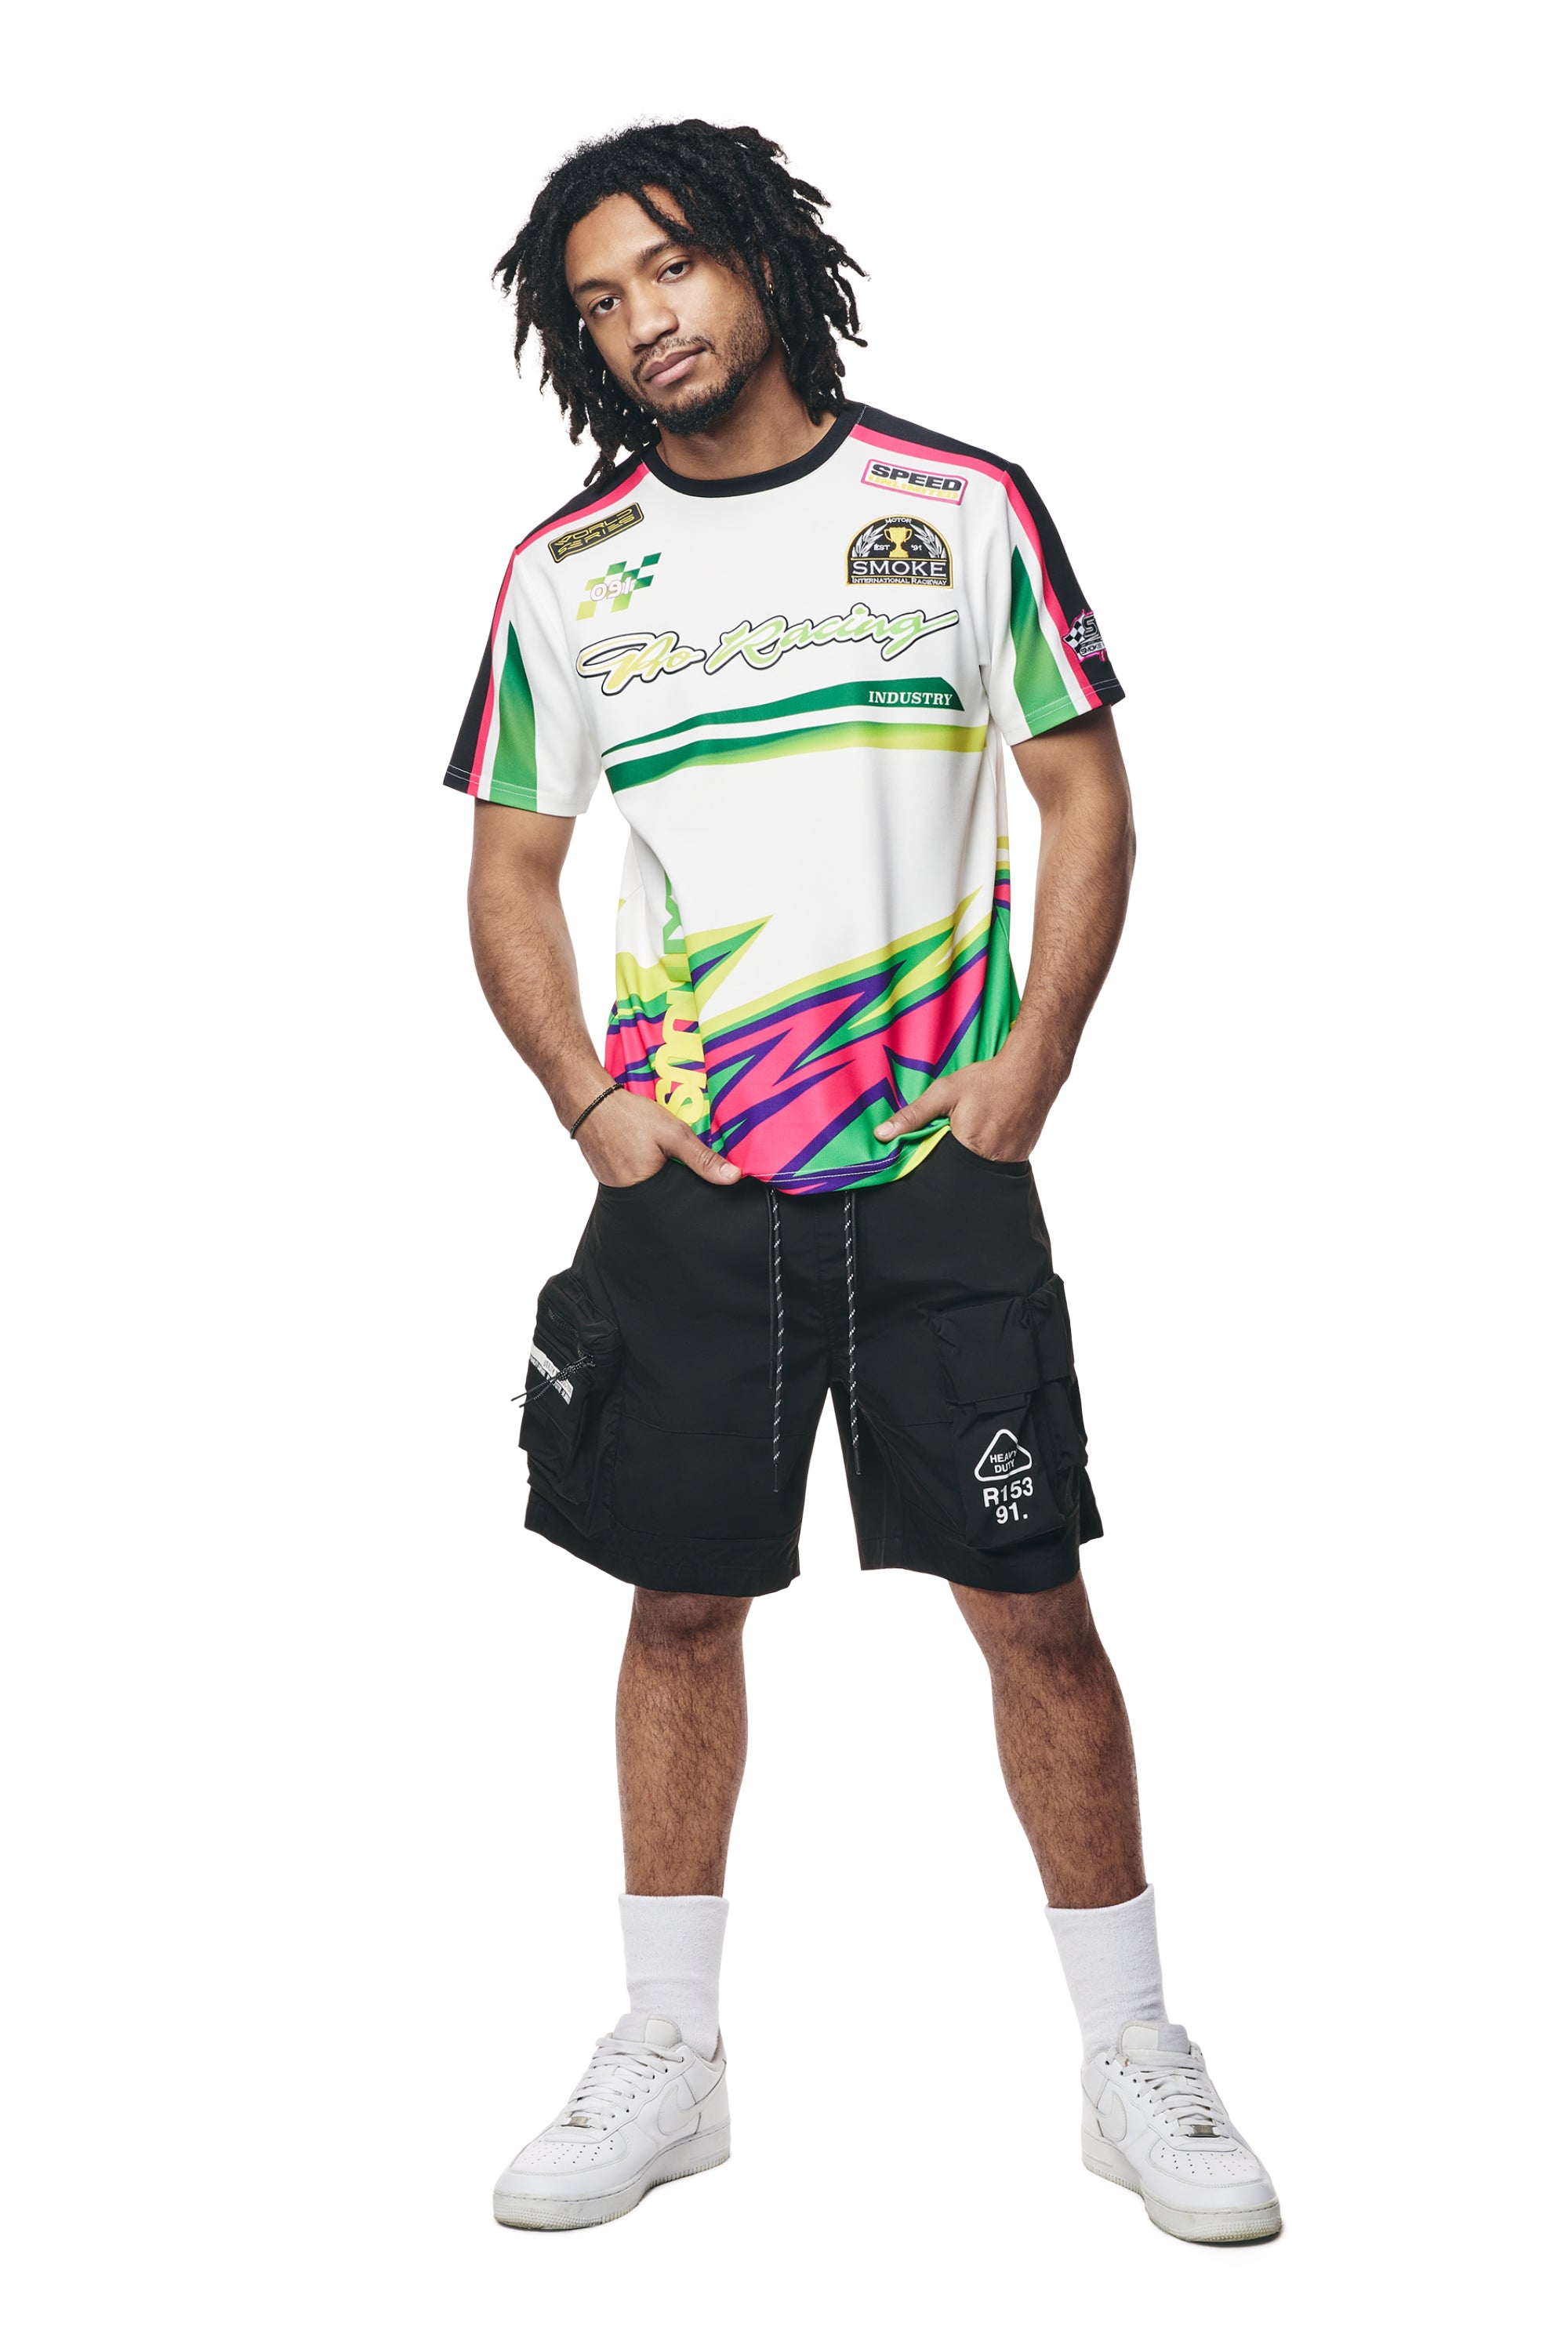 Racing Sublimation SS T-Shirt - Neon